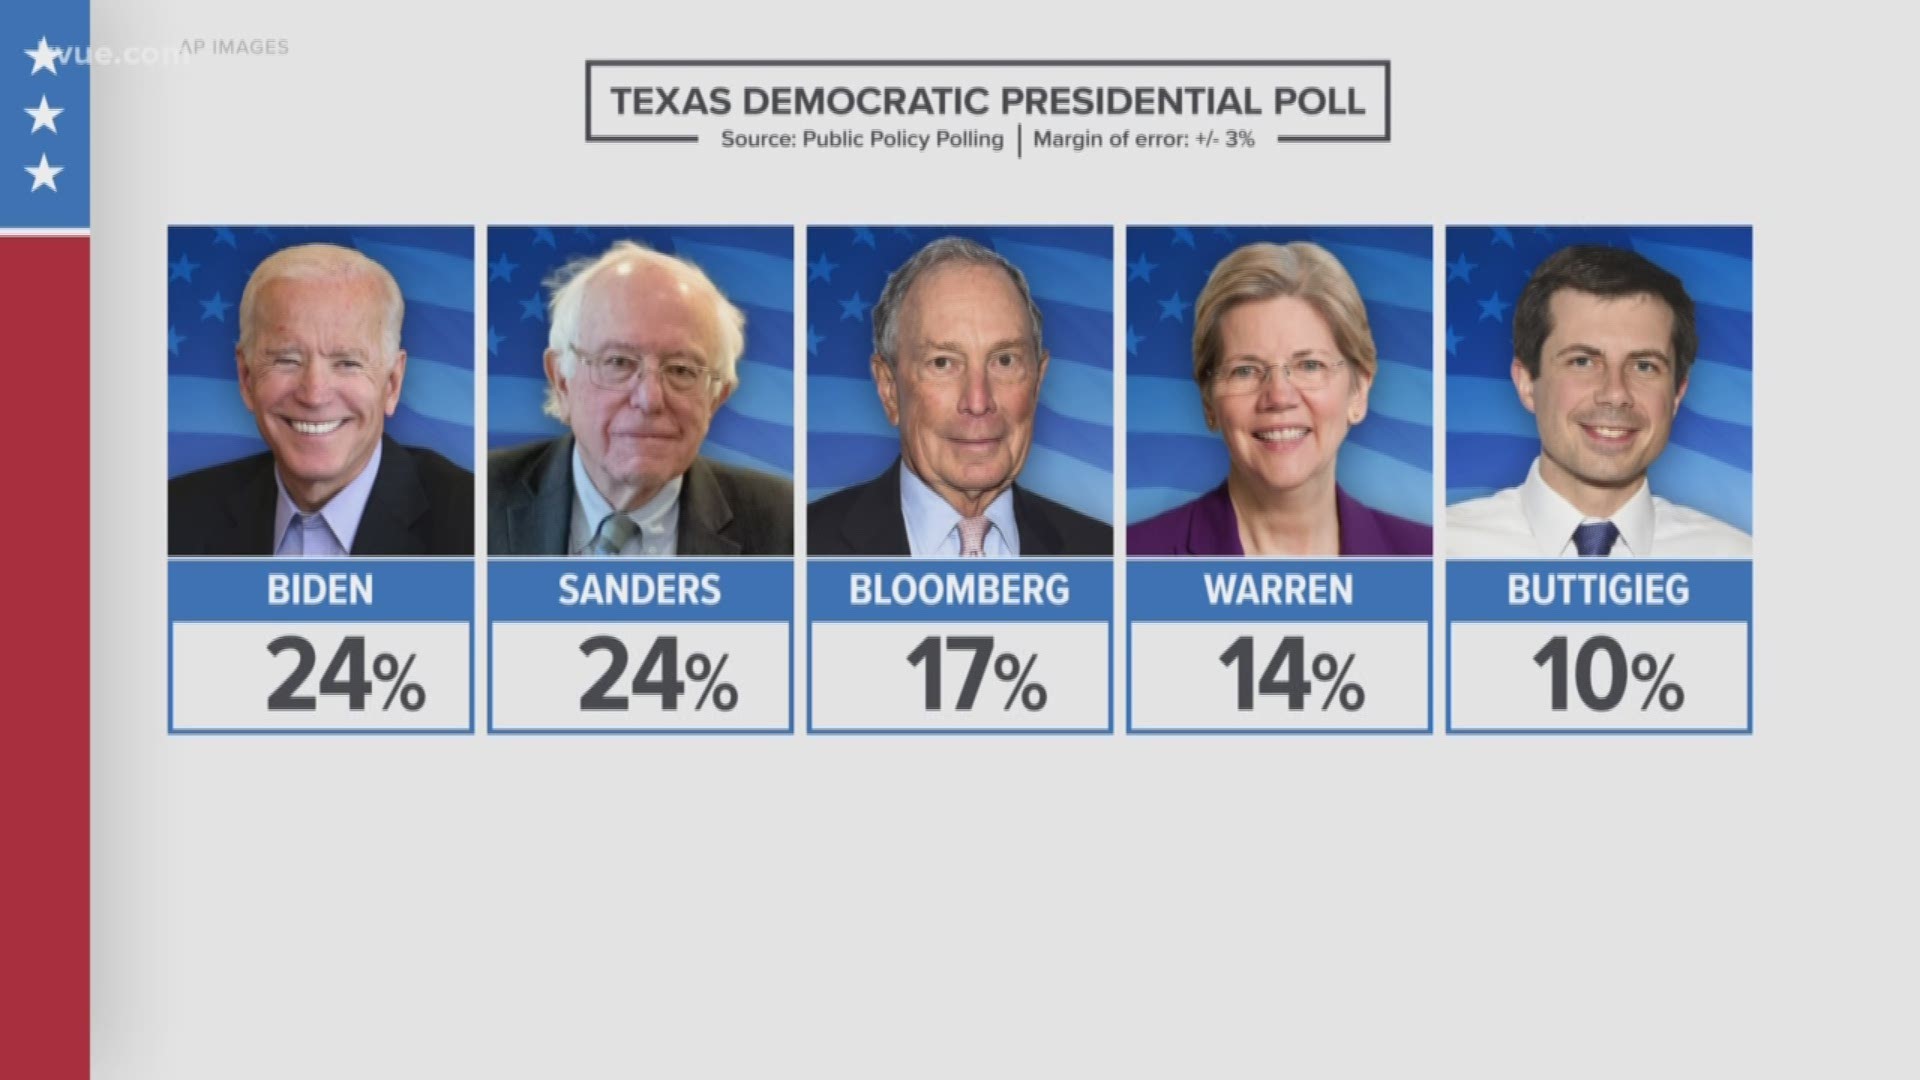 New poll numbers show two Democratic hopefuls are neck-and-neck in Texas.